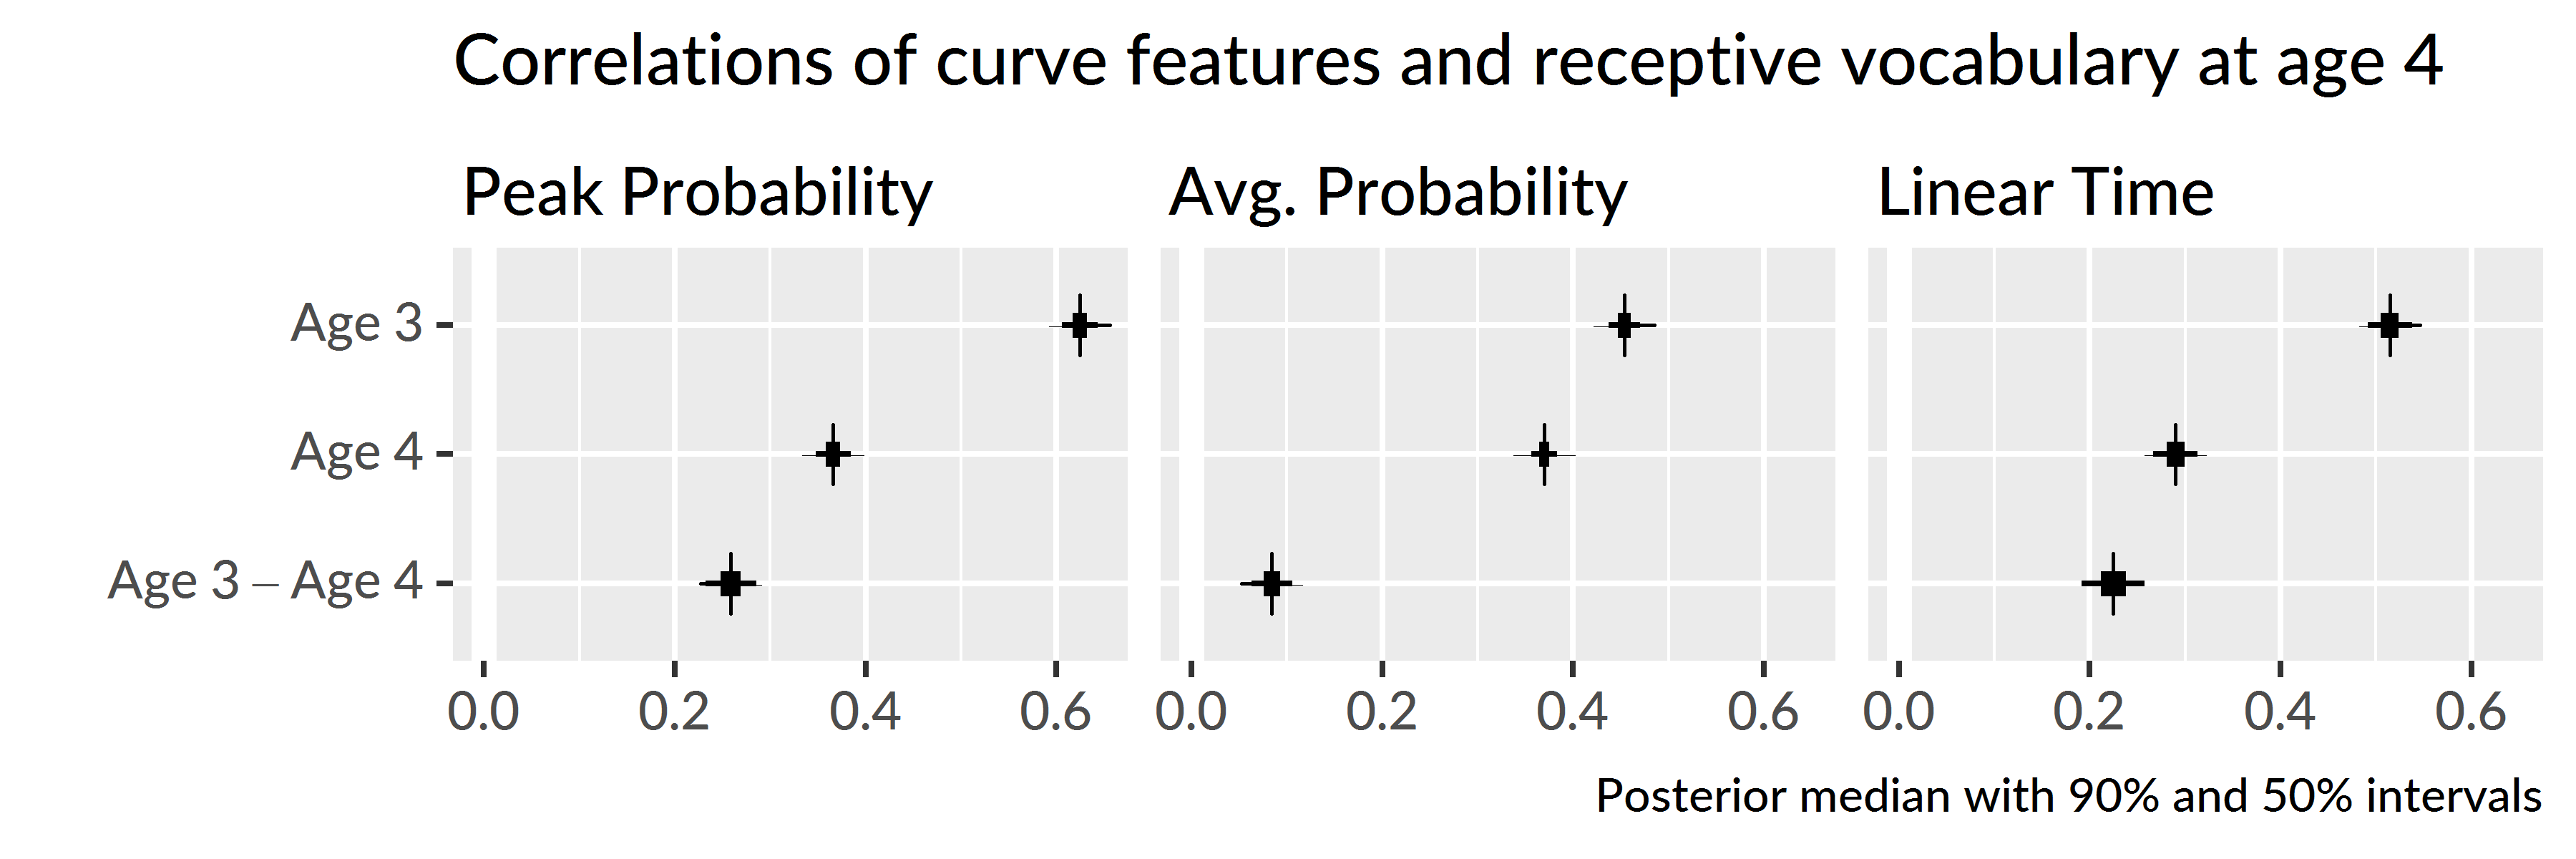 Uncertainty intervals for the correlations of growth curve features from age 3 and age 4 with age-4 receptive vocabulary (PPVT-4 standard scores). The bottom row shows pairwise differences between the age-3 and age-4 correlations.